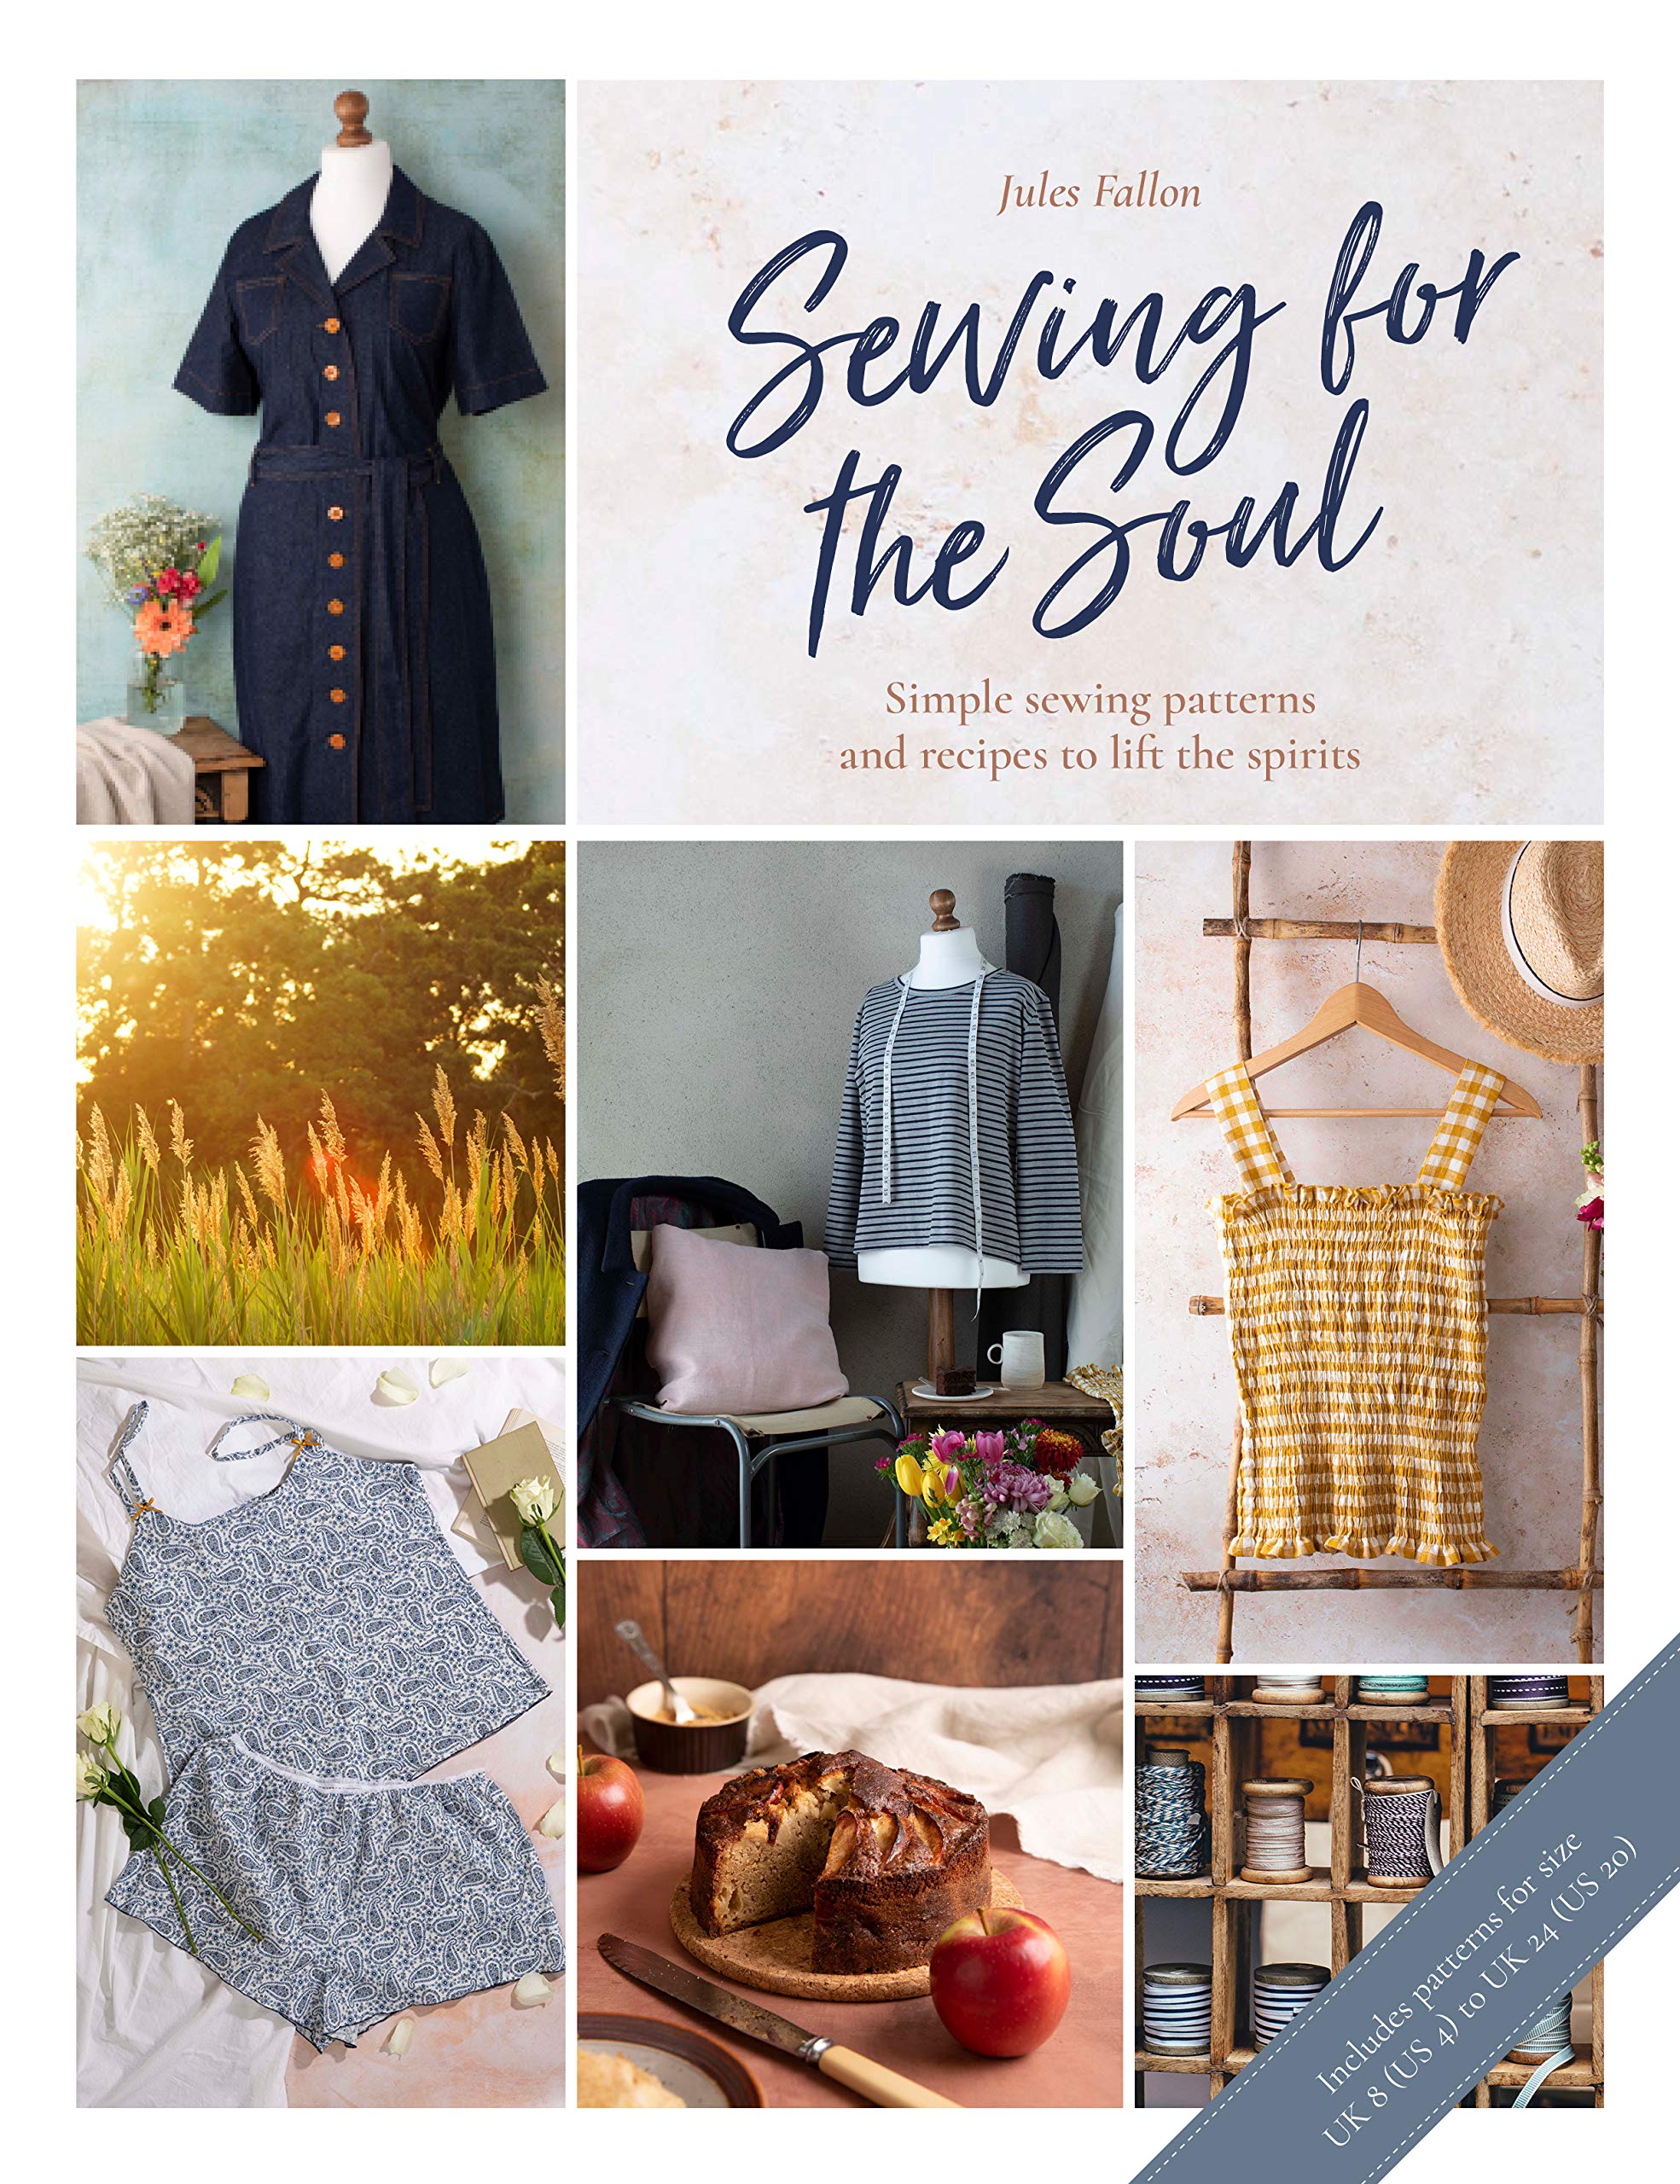 Sewing For The Soul by Jules Fallon